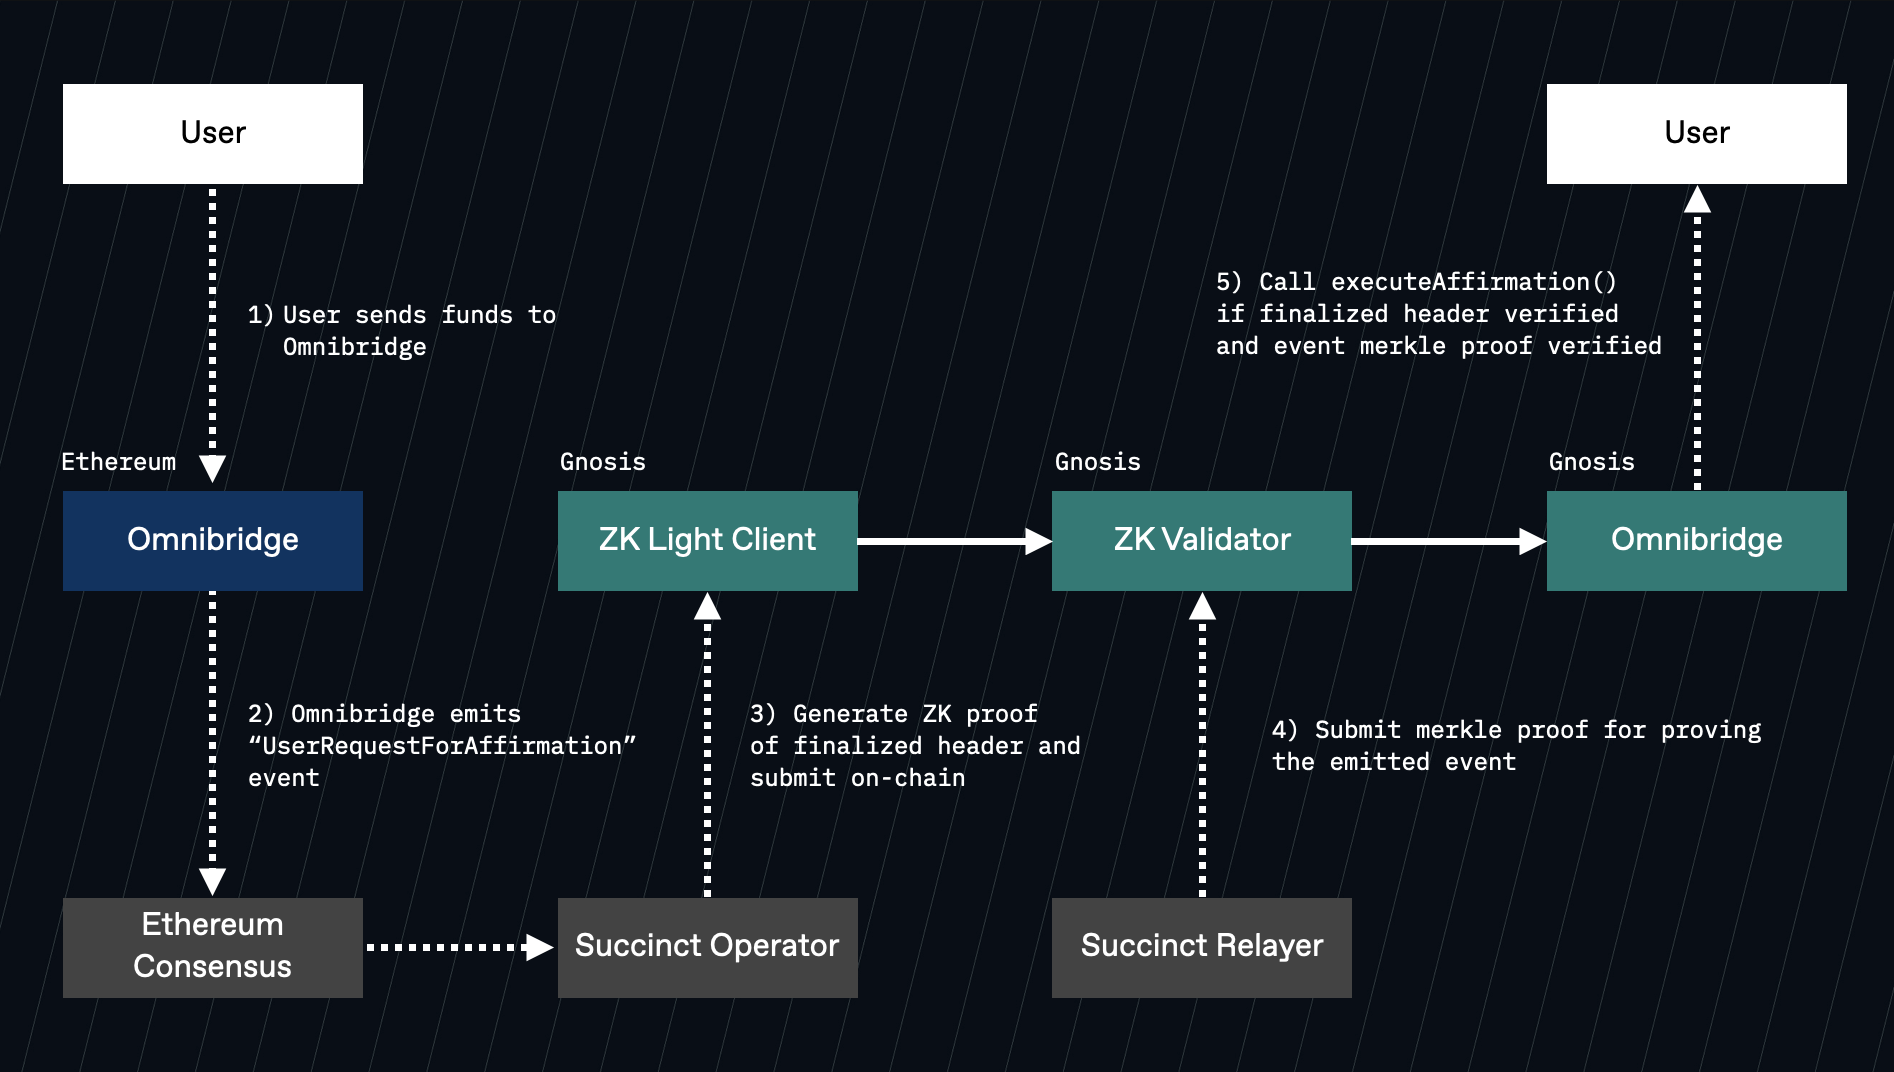 Securing $40M+ TVL on Gnosis Chain with Succinct's Ethereum ZK Light Client